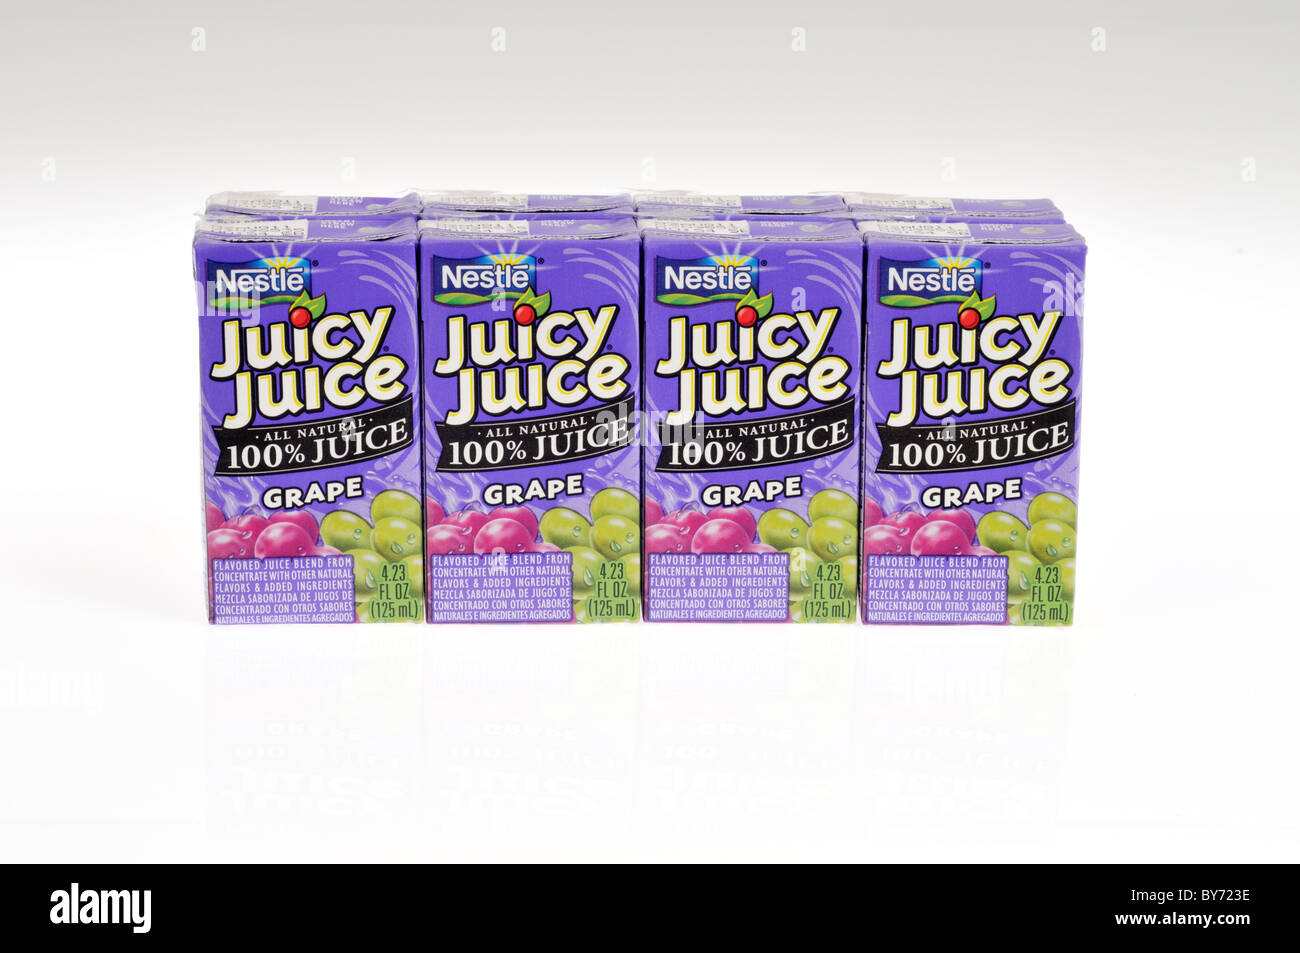 A pack of Nestle Juicy Juice juice boxes on white background cut out. Stock Photo